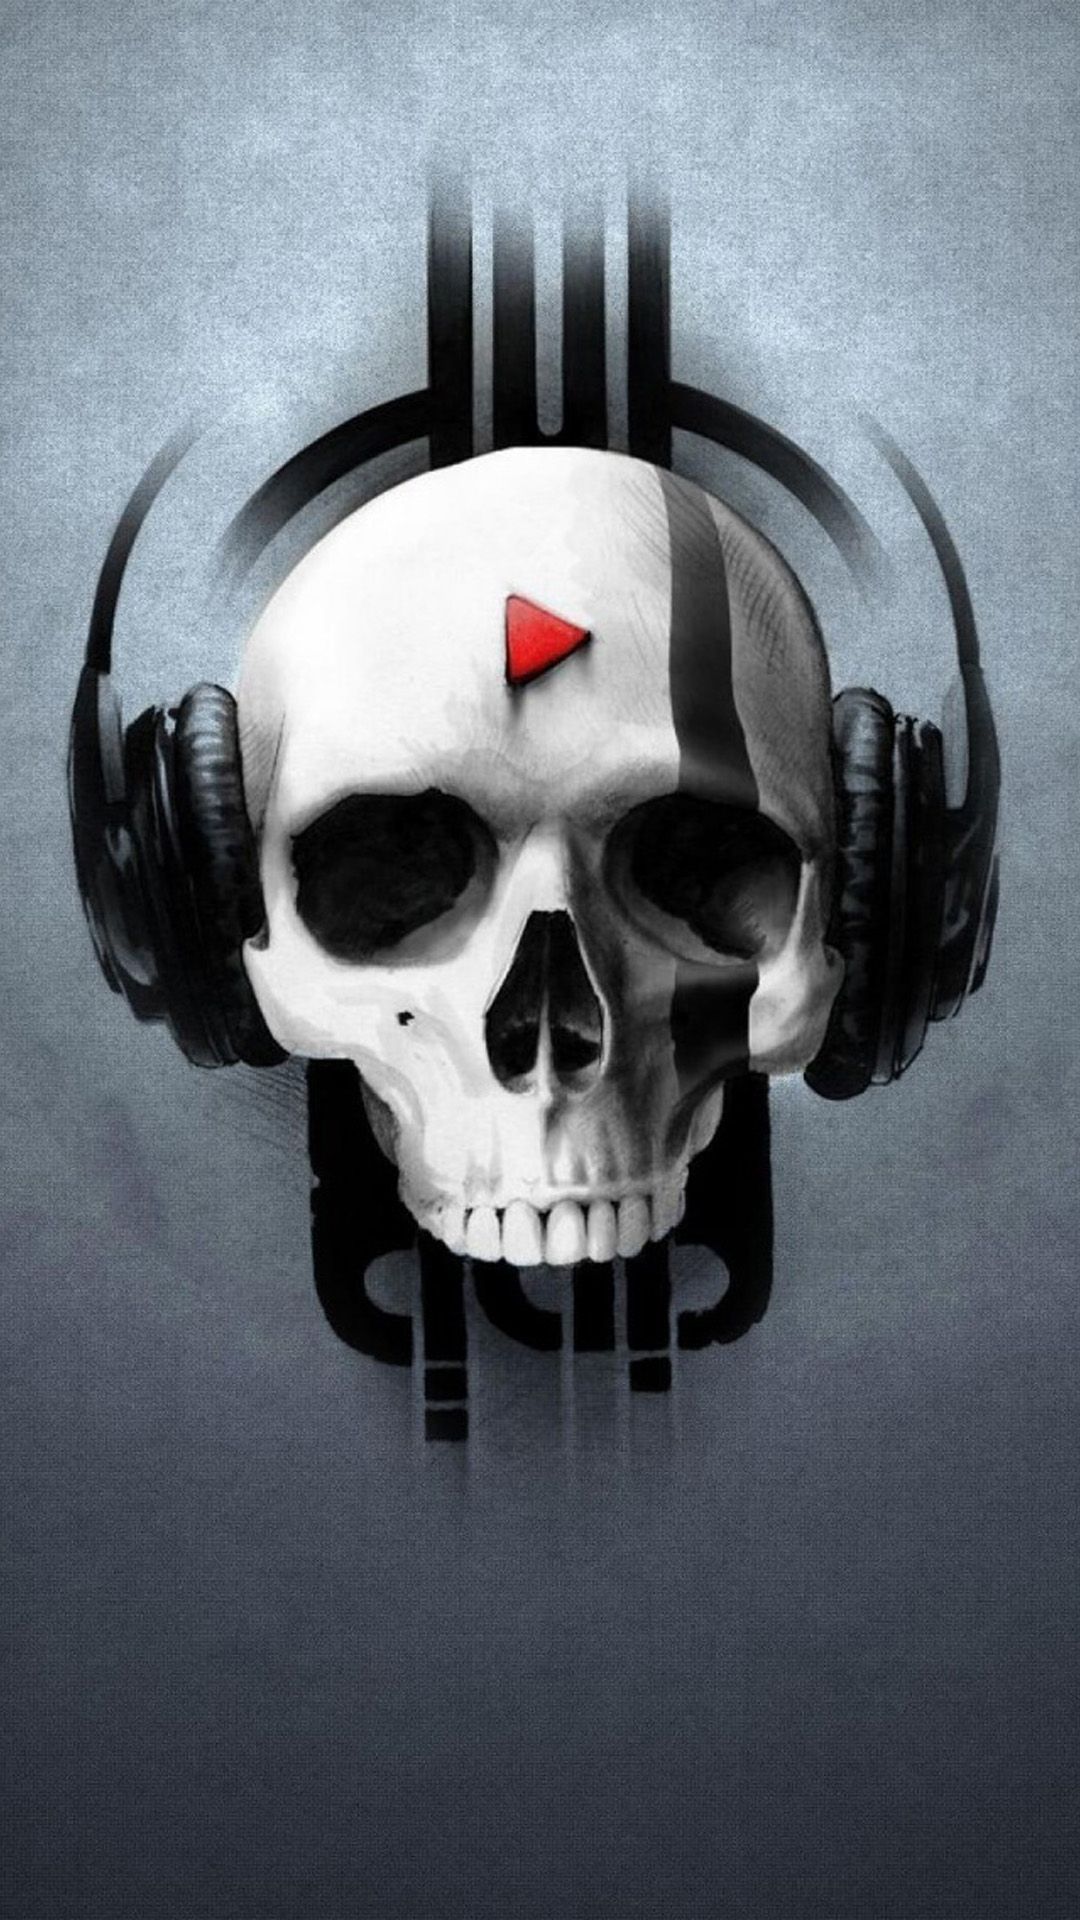 MUSIC IPHONE WALLPAPERS FOR THE MUSIC LOVERS. Skull wallpaper